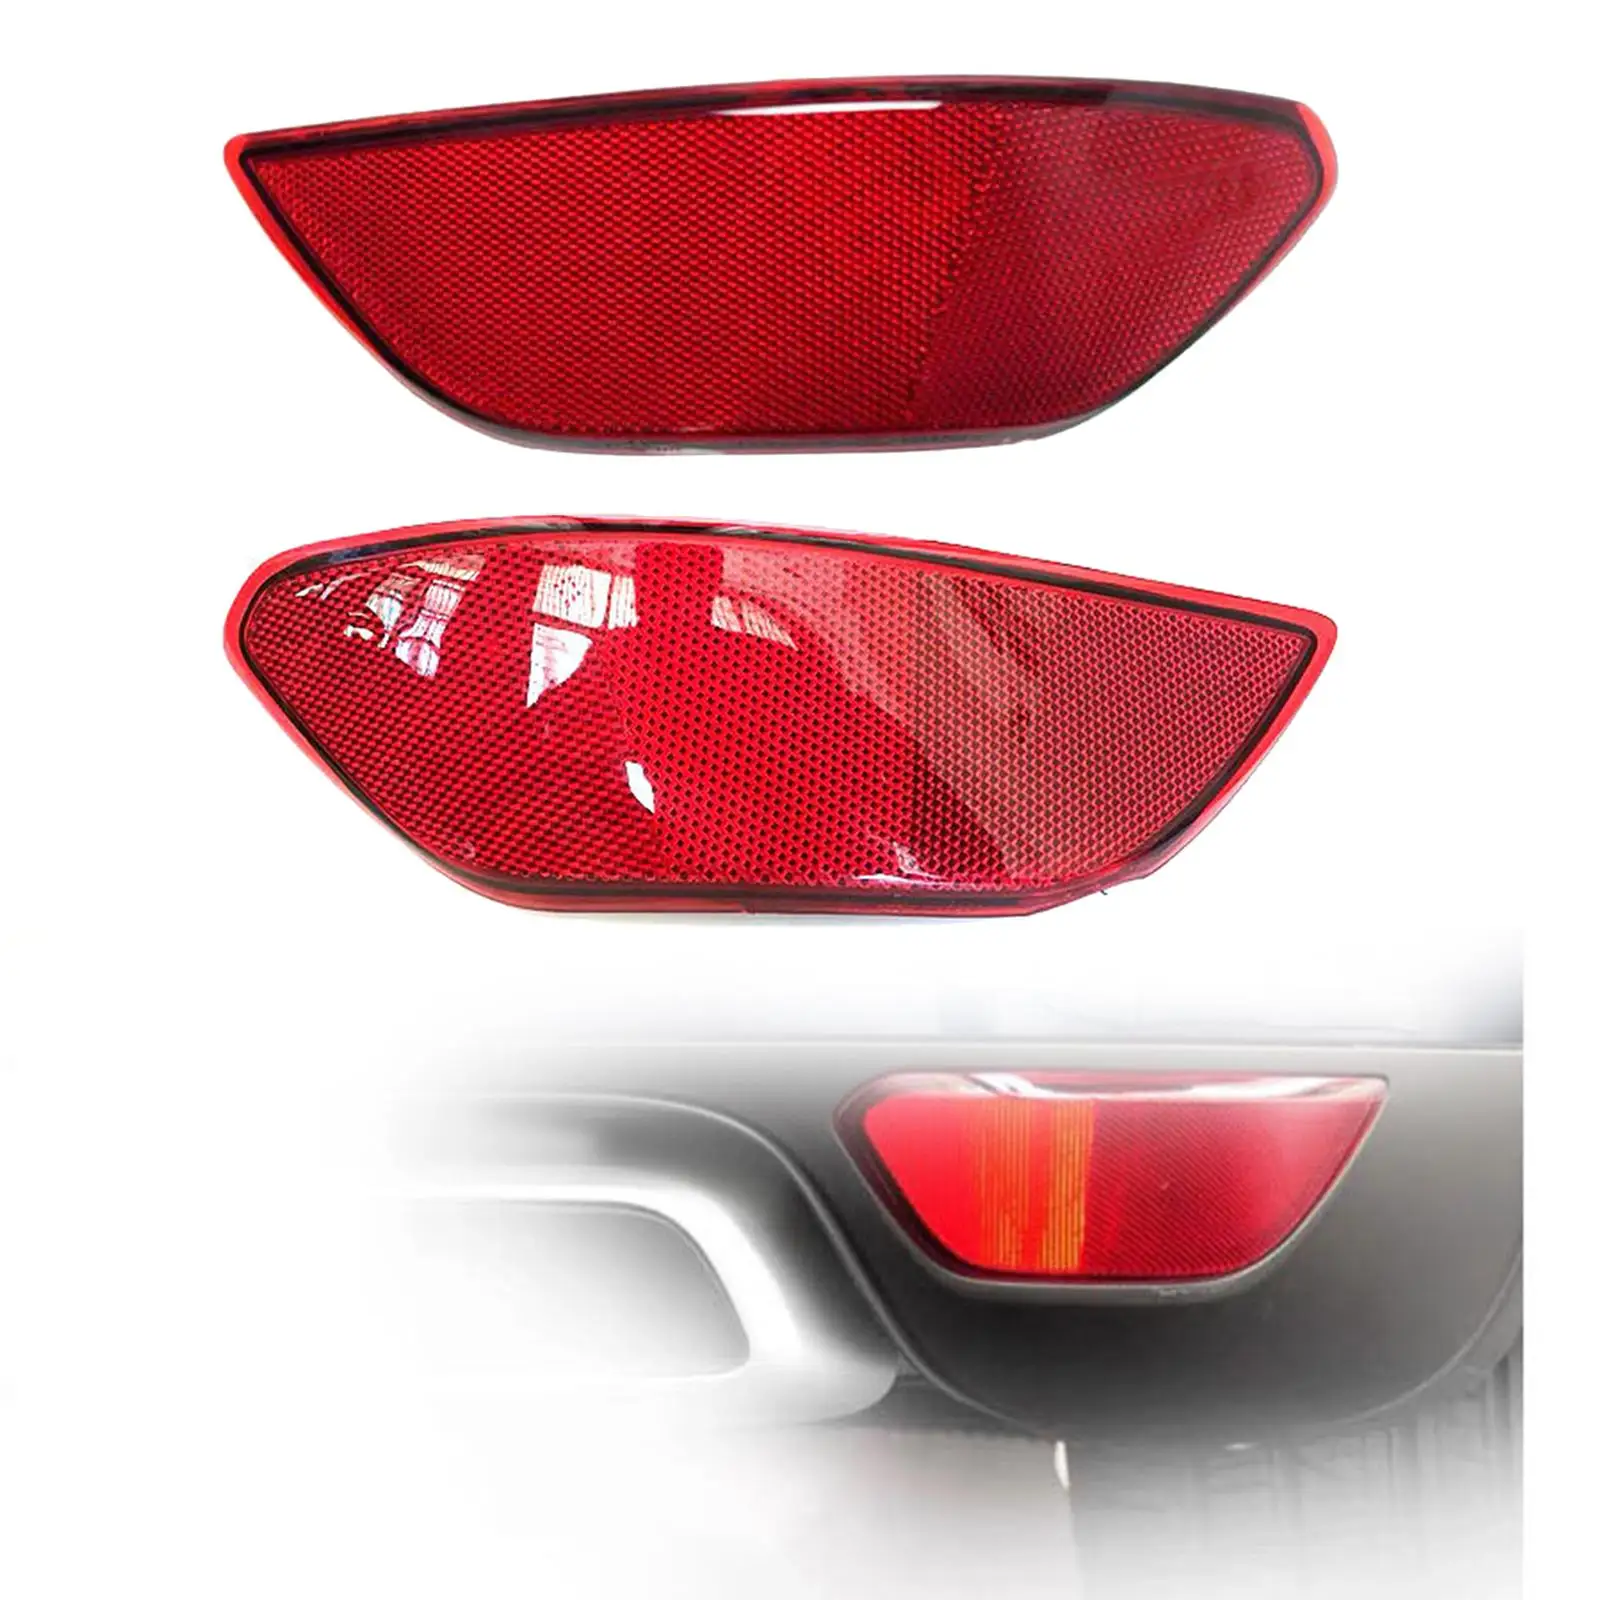 Rear Reflector for Car Replacement Drivers Rear Bumper Trim Reflector Marker Red Rear Bumper Reflector for Porsche Cayenne